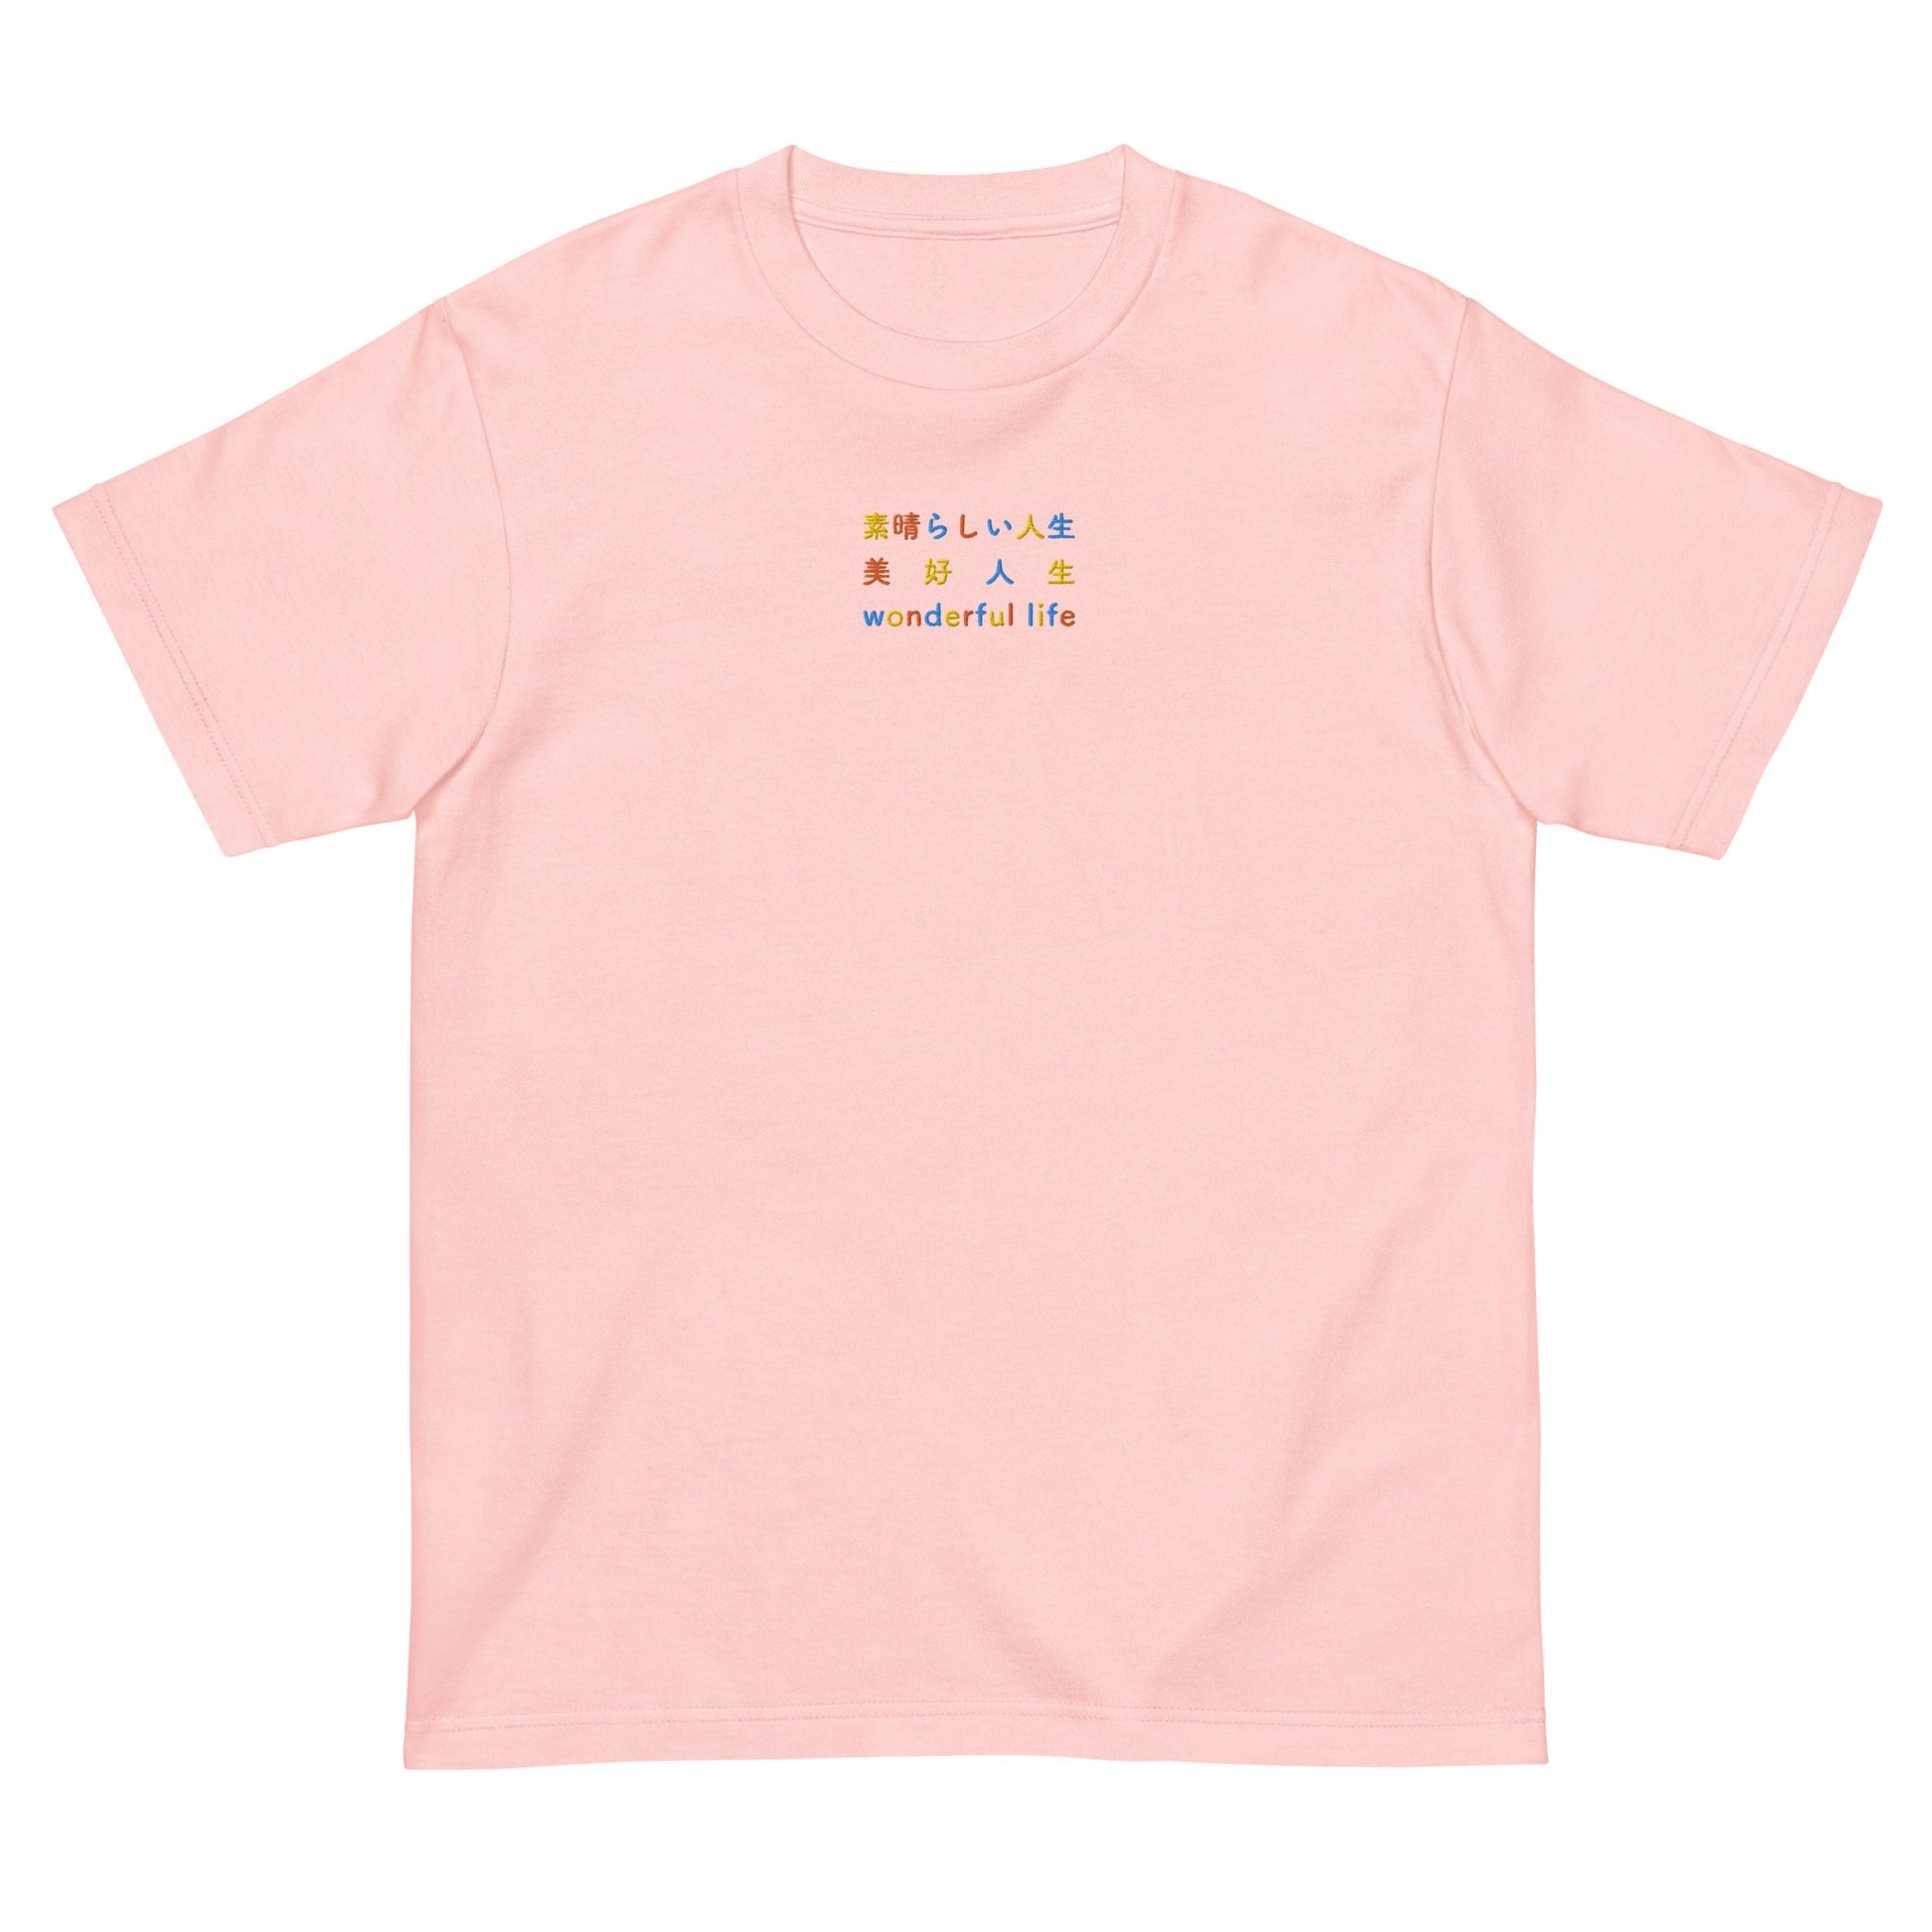 Pink High Quality Tee - Front Design with Yellow, Orange and Blue Embroidery "Wonderful Life" in Japanese,Chinese and English